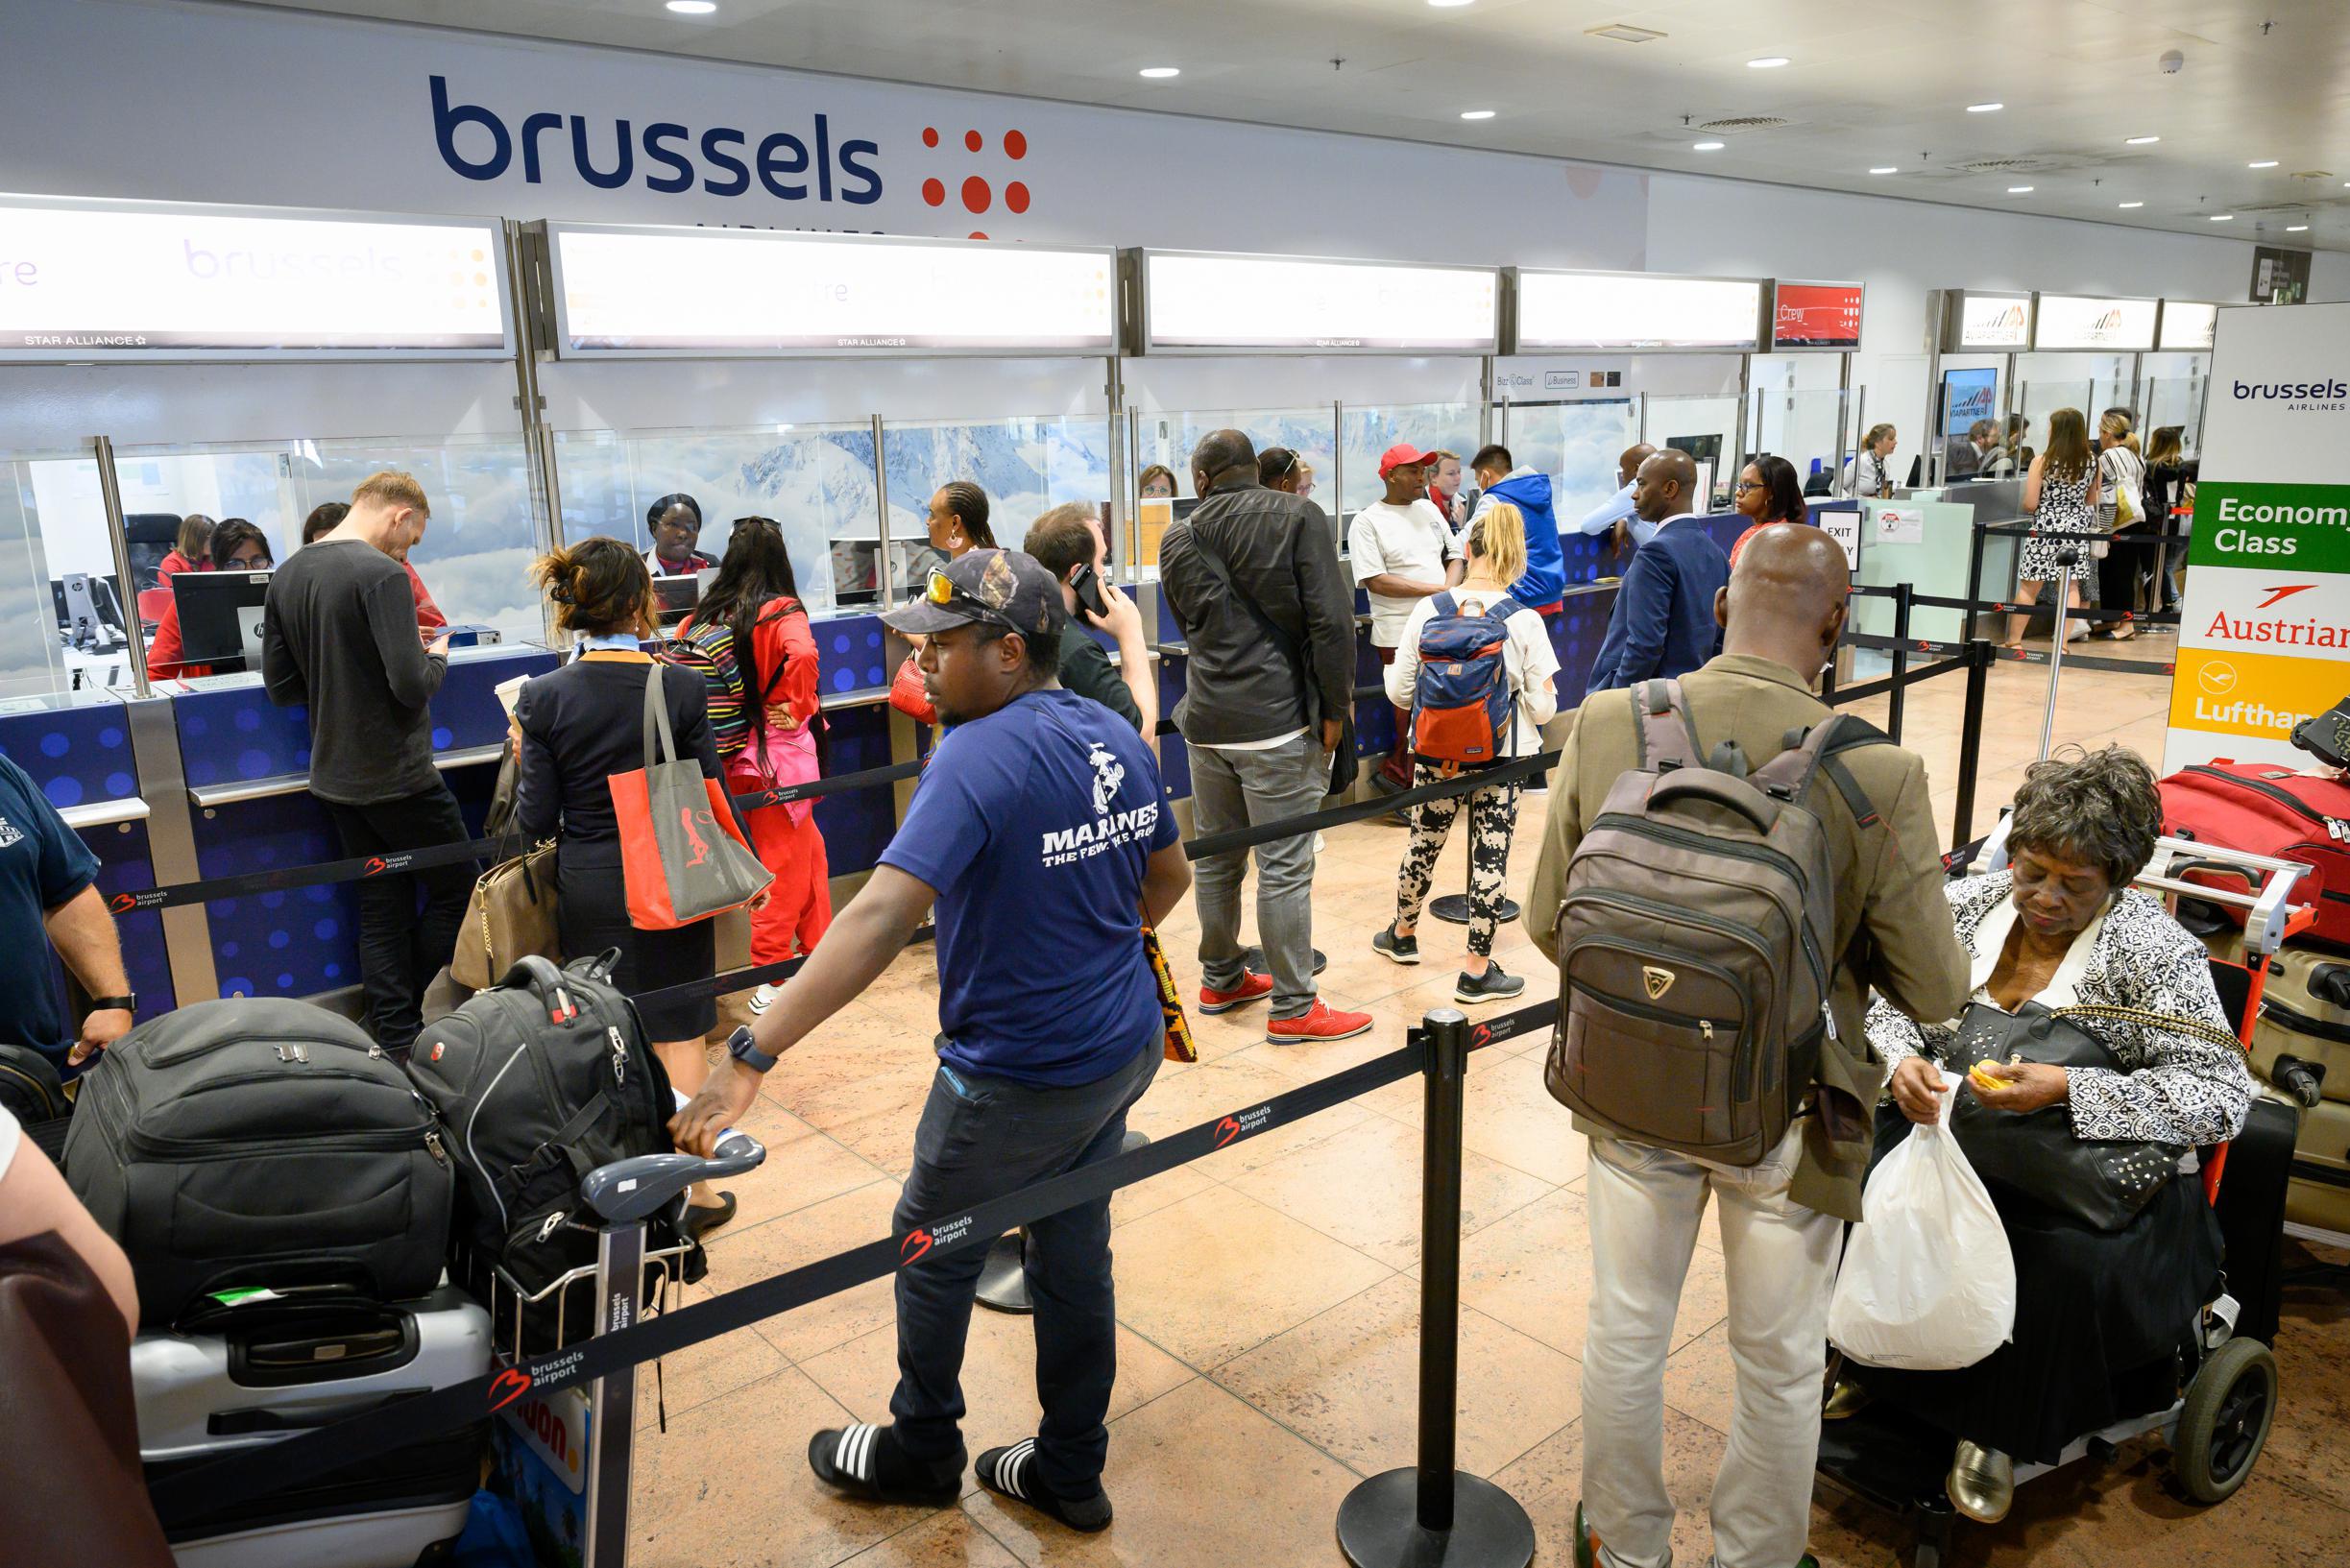 Several Brussels Airlines flights canceled this morning; affected flights will not operate